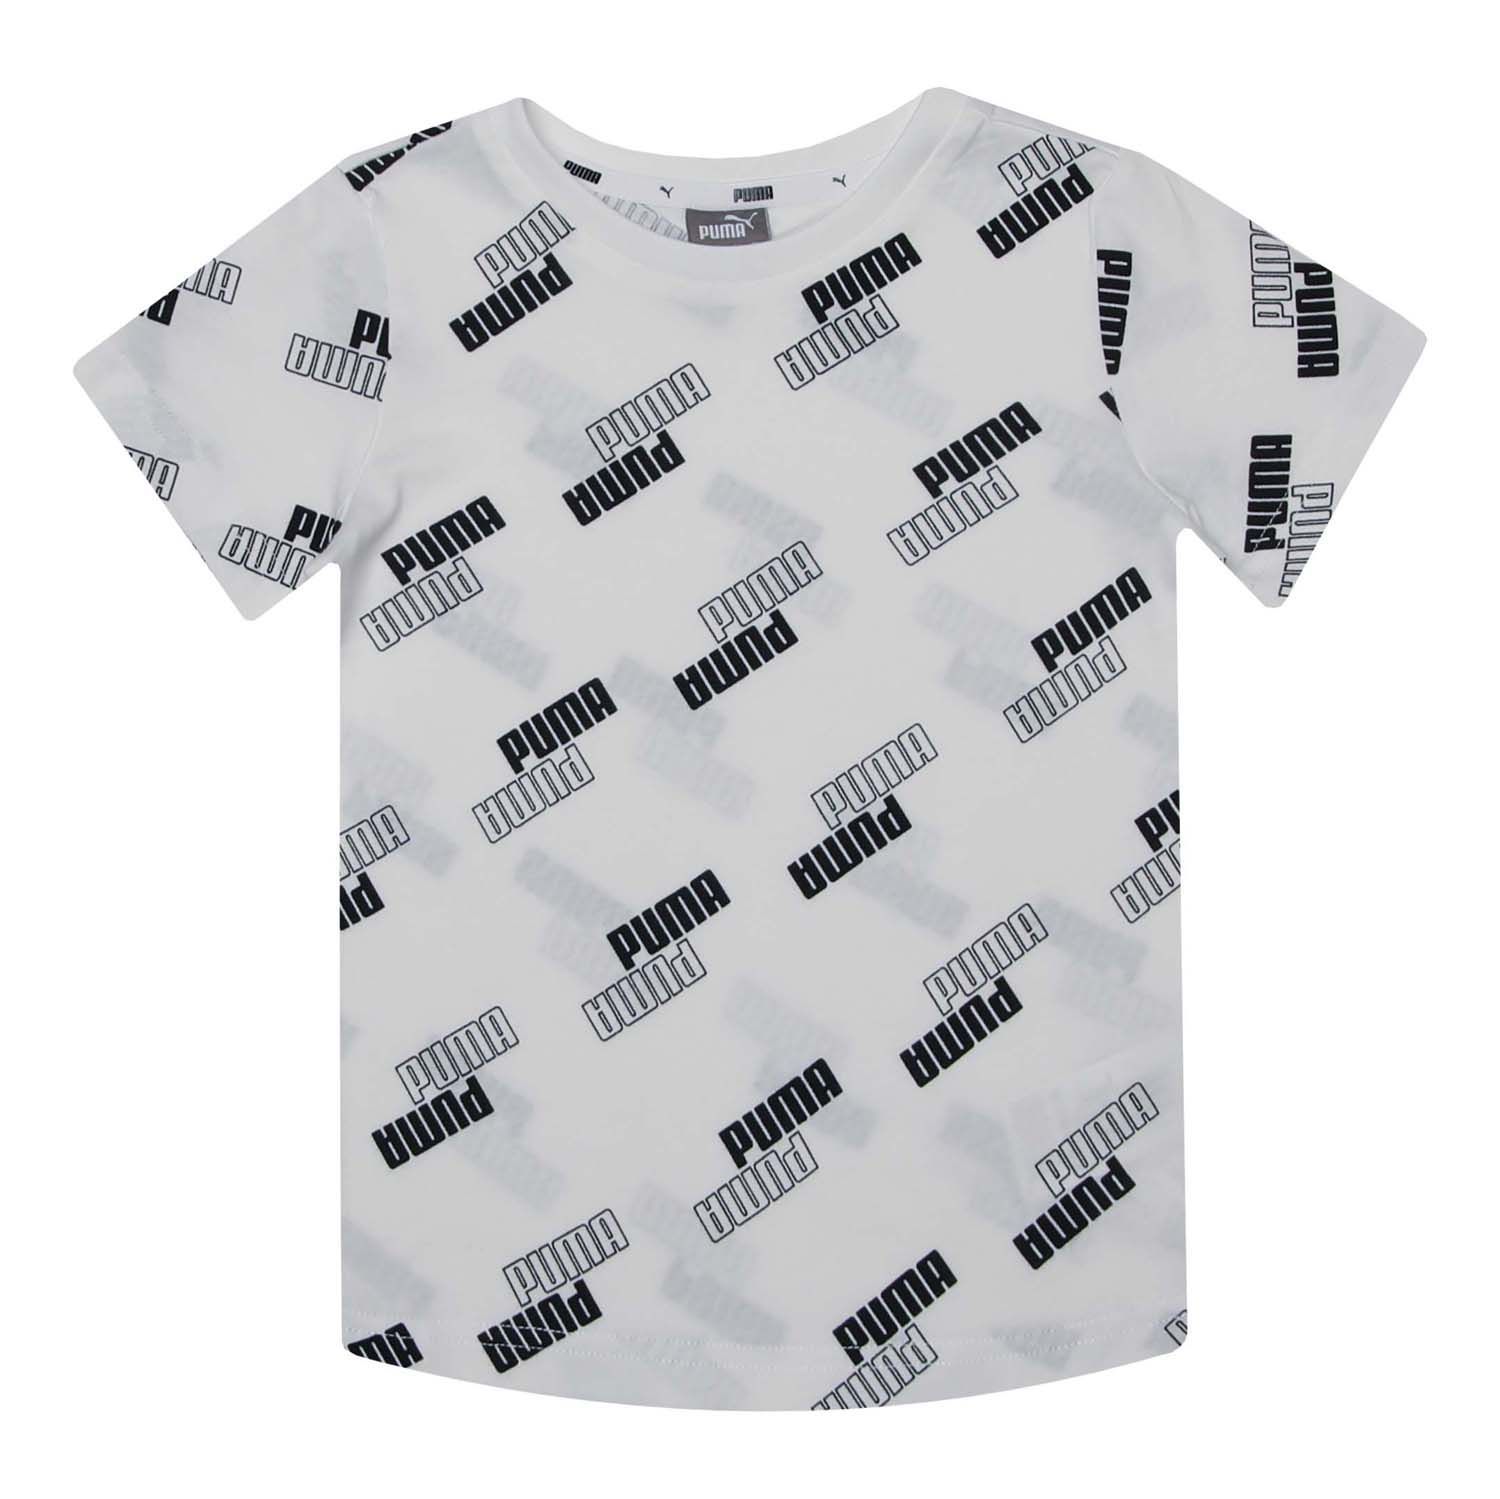 Junior Boys Puma Power T- Shirt in white.- Rib crew neck.- Short sleeves.- Graphic all over print with repeated Puma Wordmark.- Regular fit.- Shell: 100% Cotton. - Ref: 84560402E